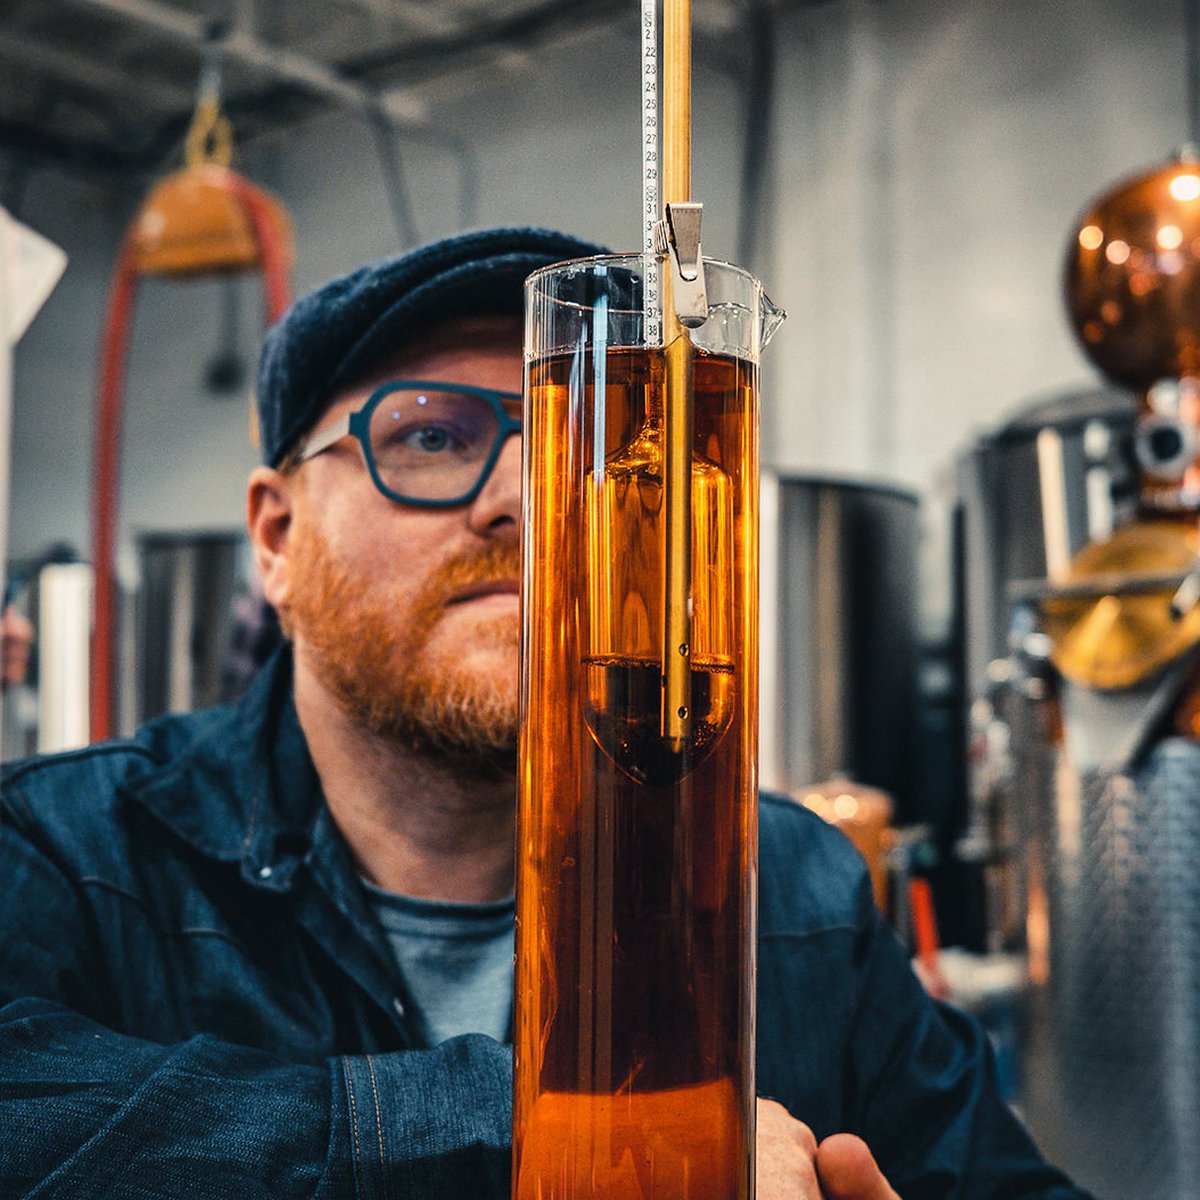 Master Distiller @thisisabryce proofing our #whisky in preparation for bottling. We distill ‘essential whiskies’ - unique highly flavoured spirits that bring life to our whisky expressions. Are you ready to explore? #themalignerange #canadianwhisky #jasper #jasperalberta